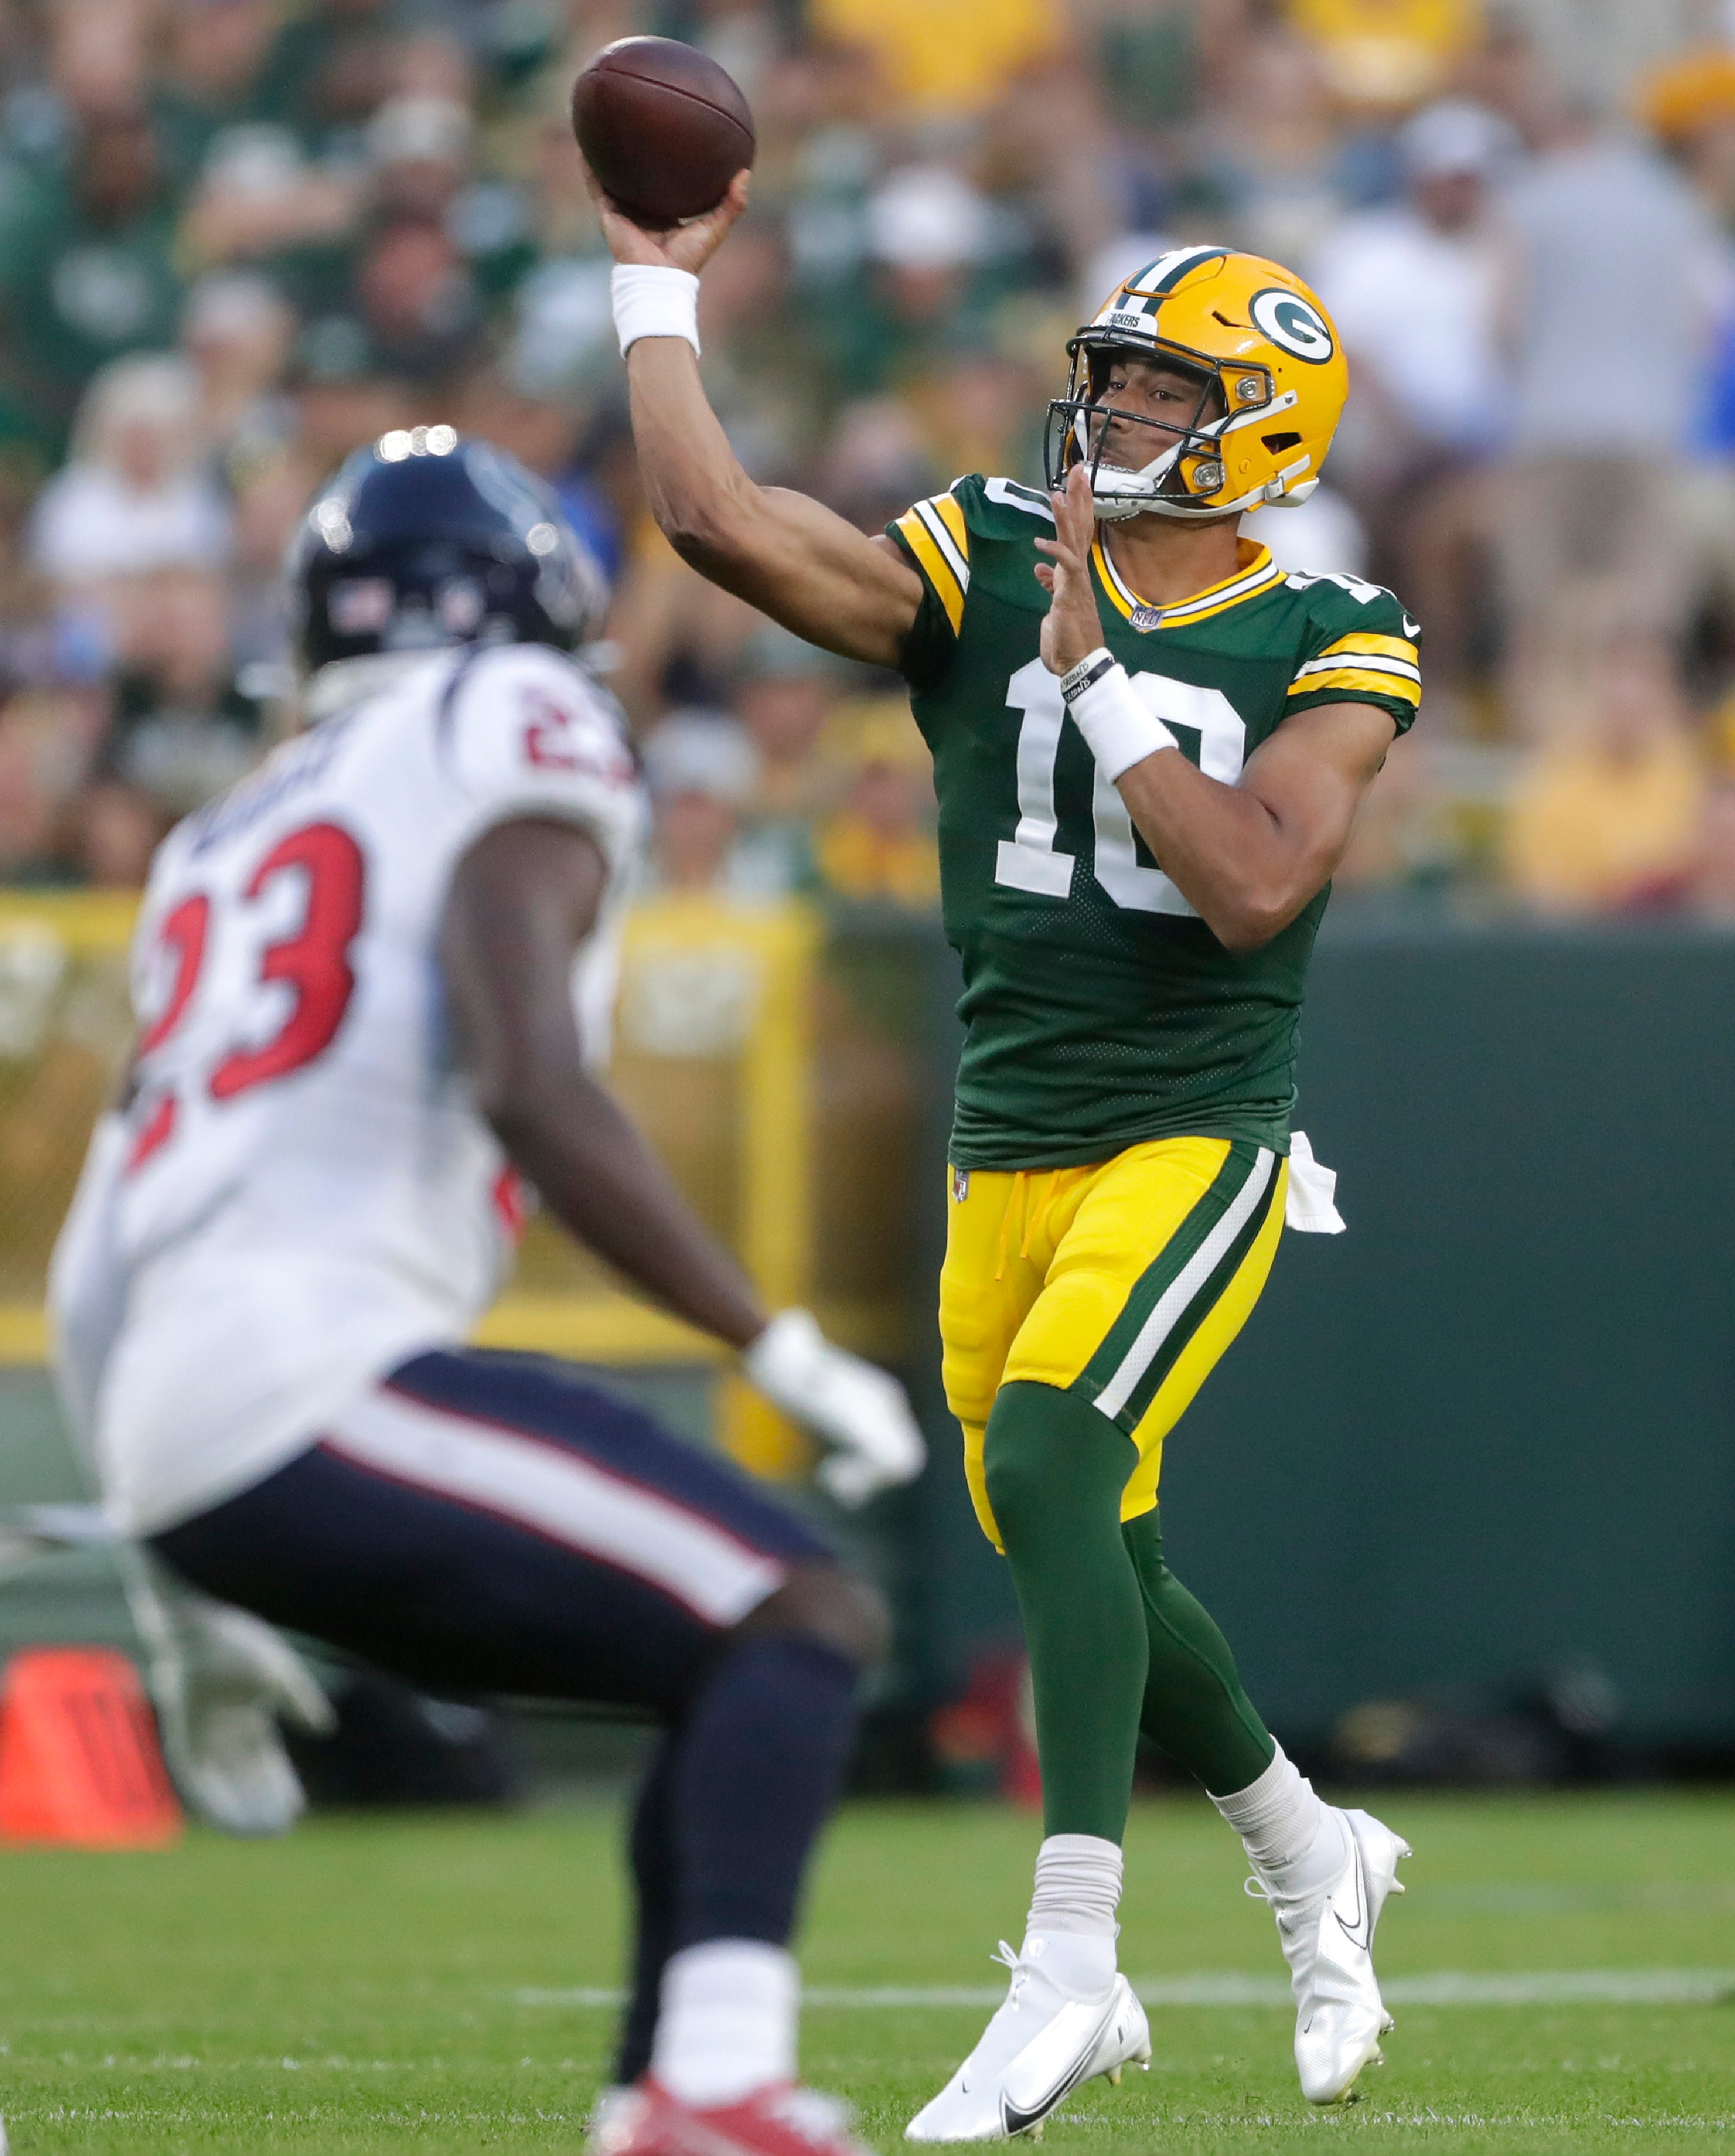 Green Bay Packers quarterback Jordan Love completed 12 of 17 passes for 122 yards and a touchdown against the Houston Texans in a preseason game on Saturday, Aug. 14, at Lambeau Field in Green Bay.